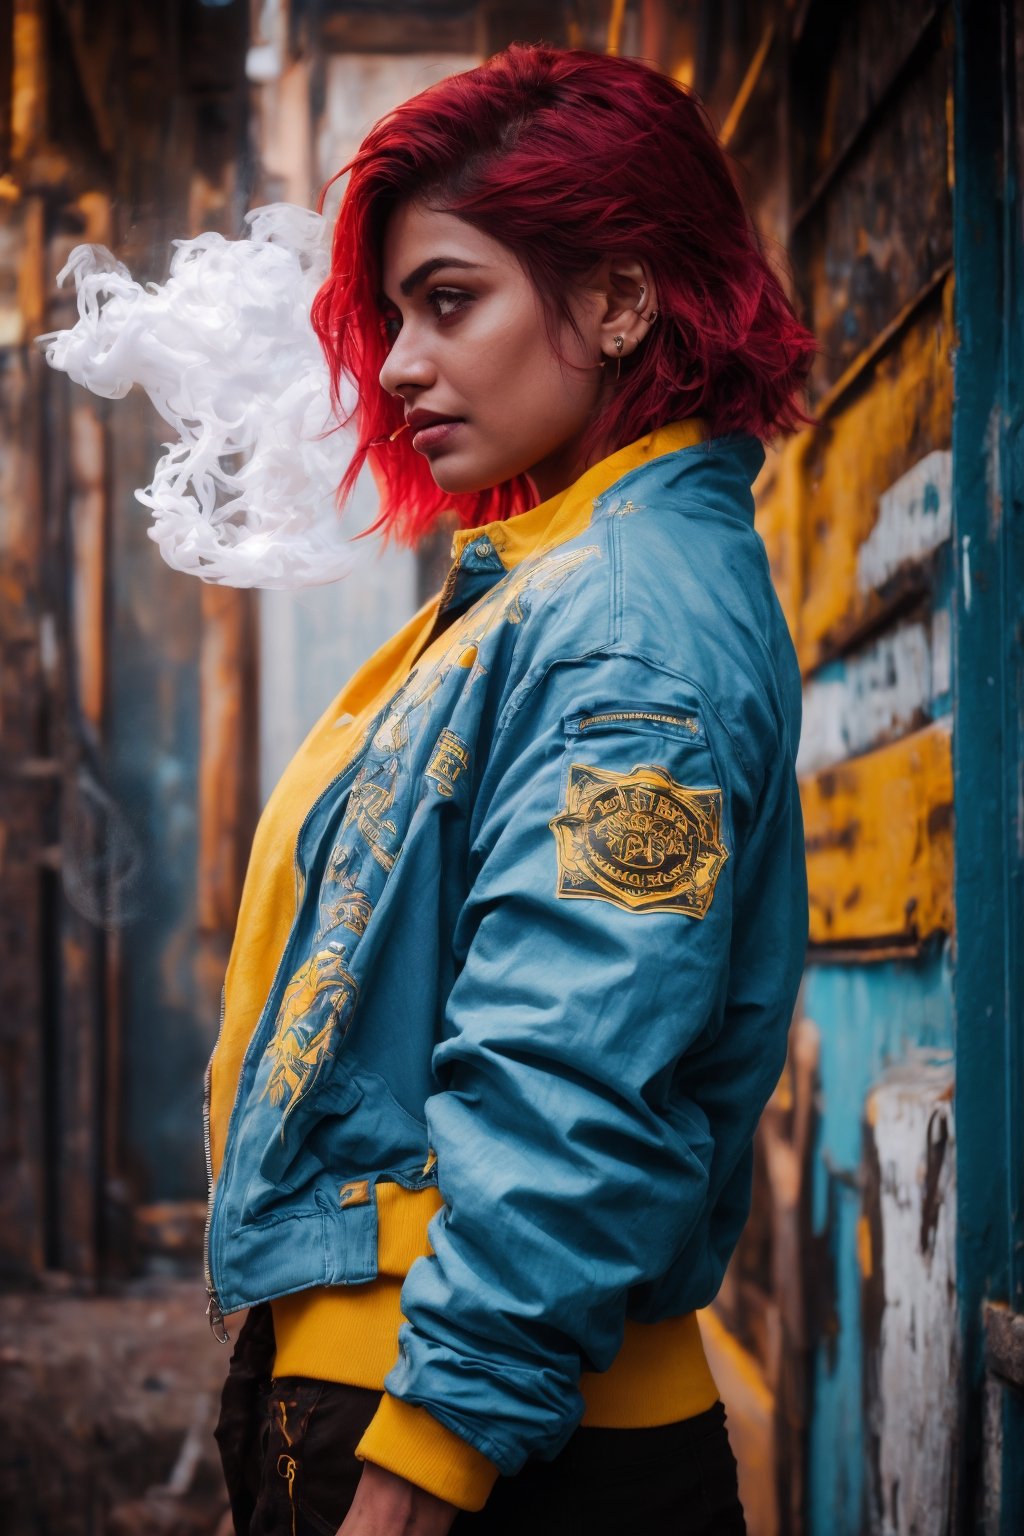 Best quality, masterpiece, woman,  cleavage cutout , red hair, short hair, yellow eyes, spiky hair, tattoos, black pants, upper body, ear piercings, blue and white bomber jacket, profile picture, smoking,27 yo,Mallu